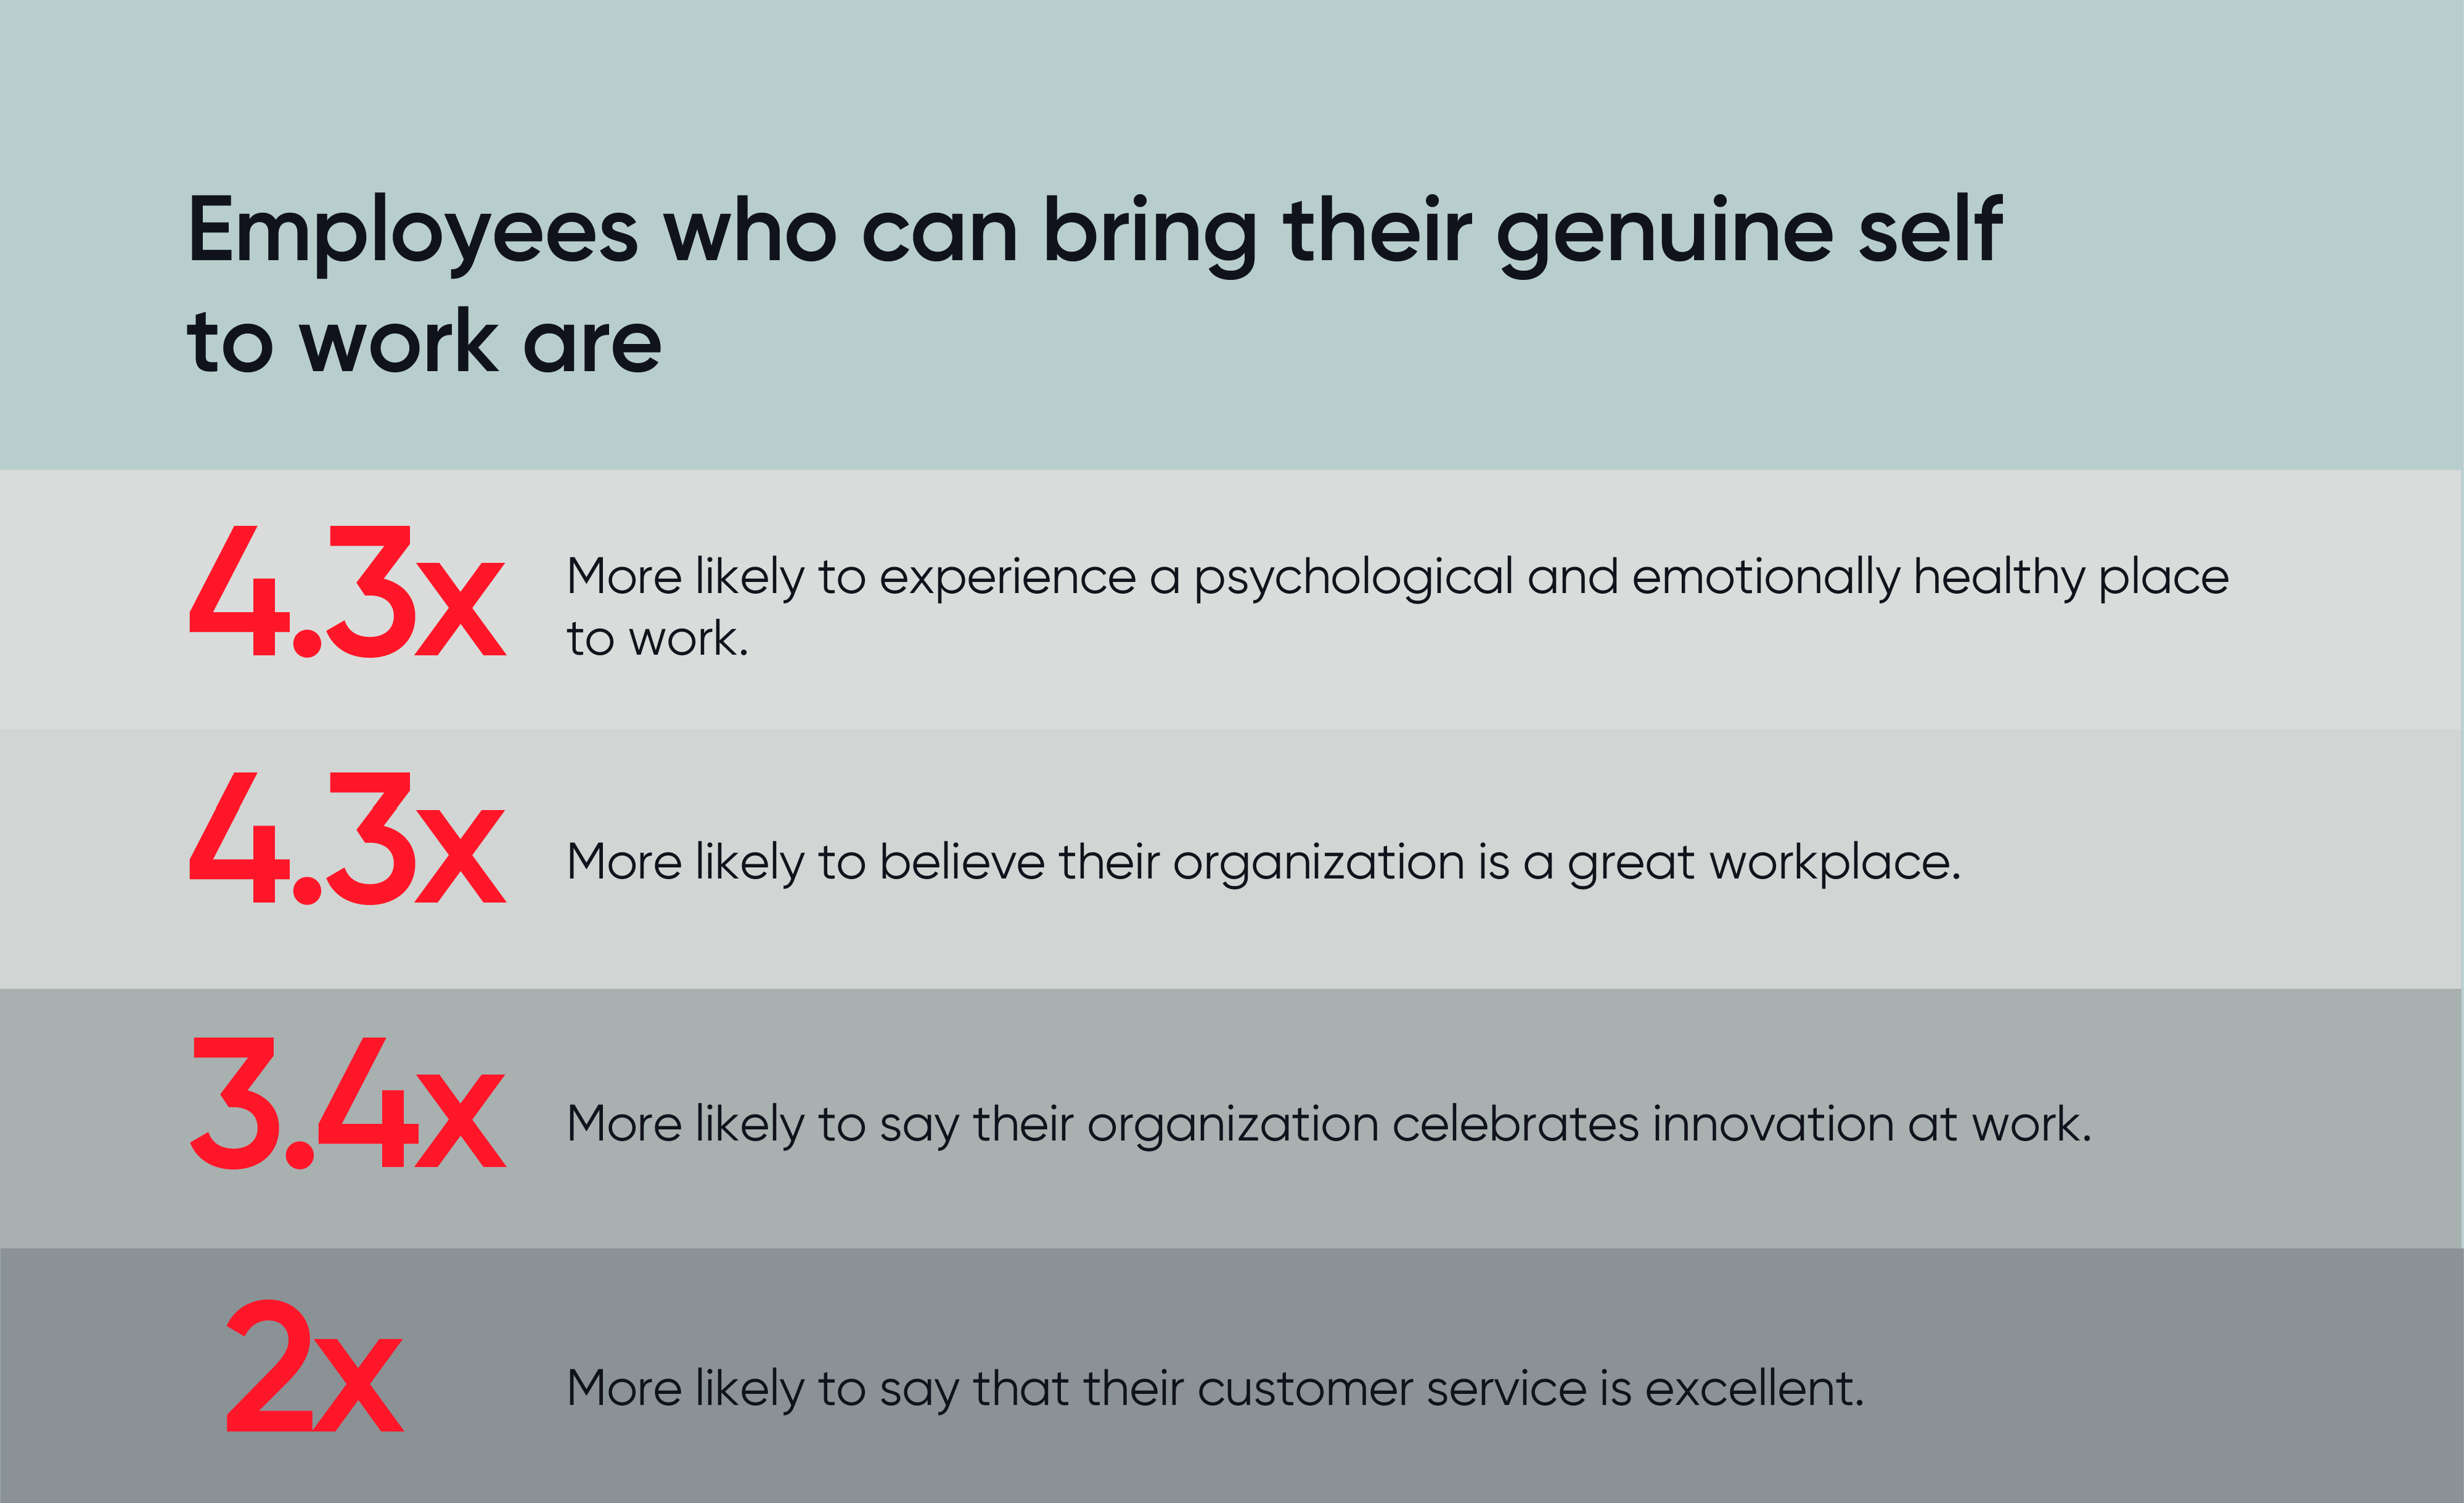 Employees who can bring their genuine self have a better experience overall.